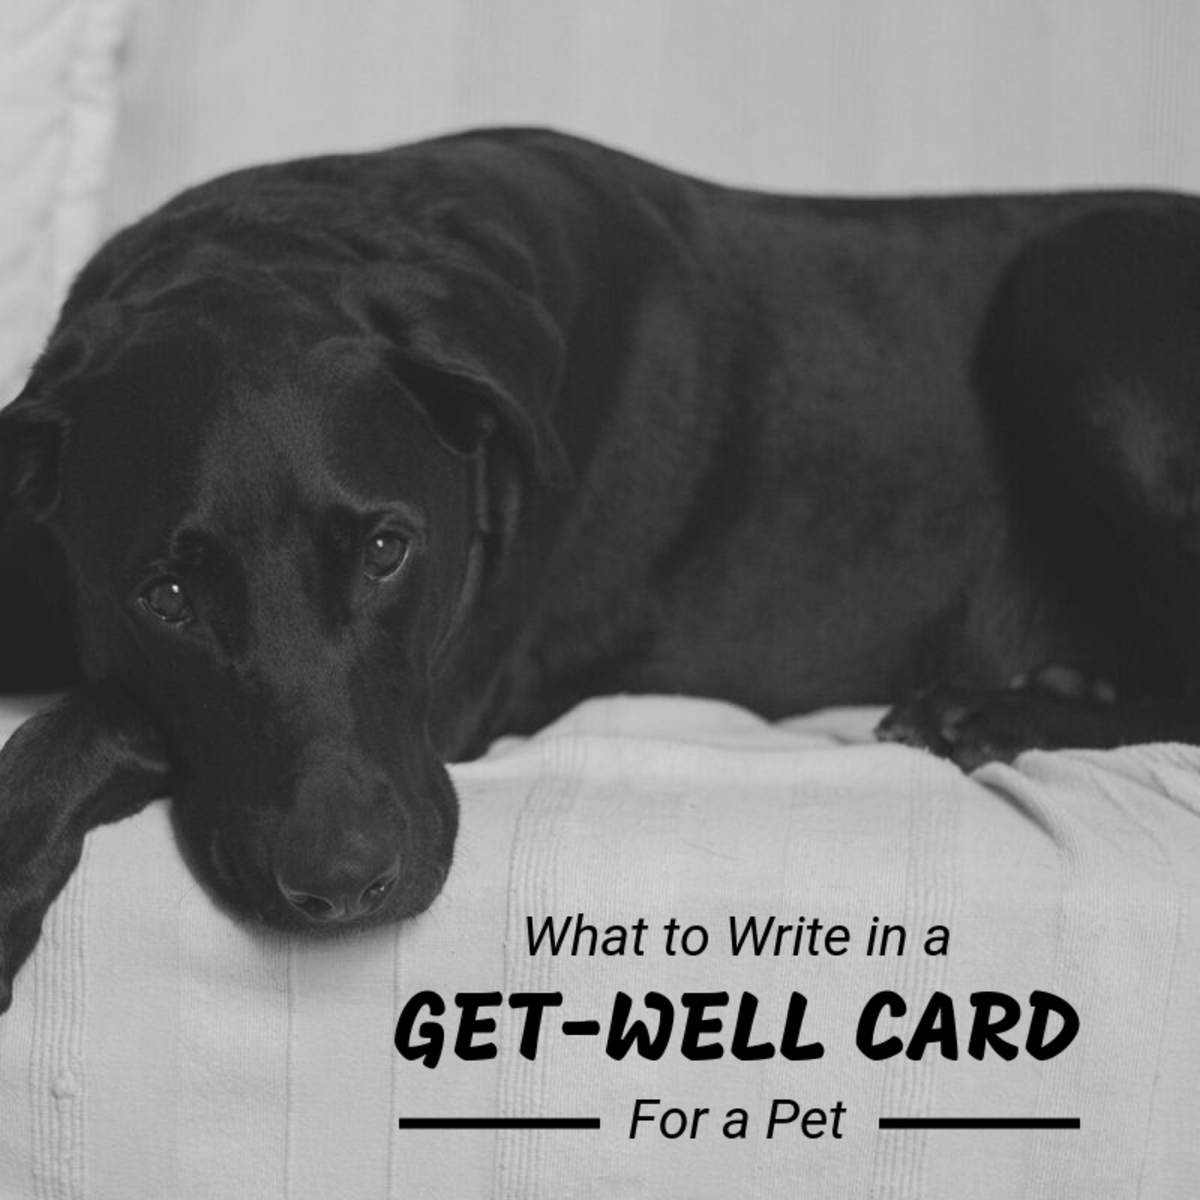 When pets get sick, their owners get anxious. Give them some support and reassurance by writing a thoughtful get-well card. 